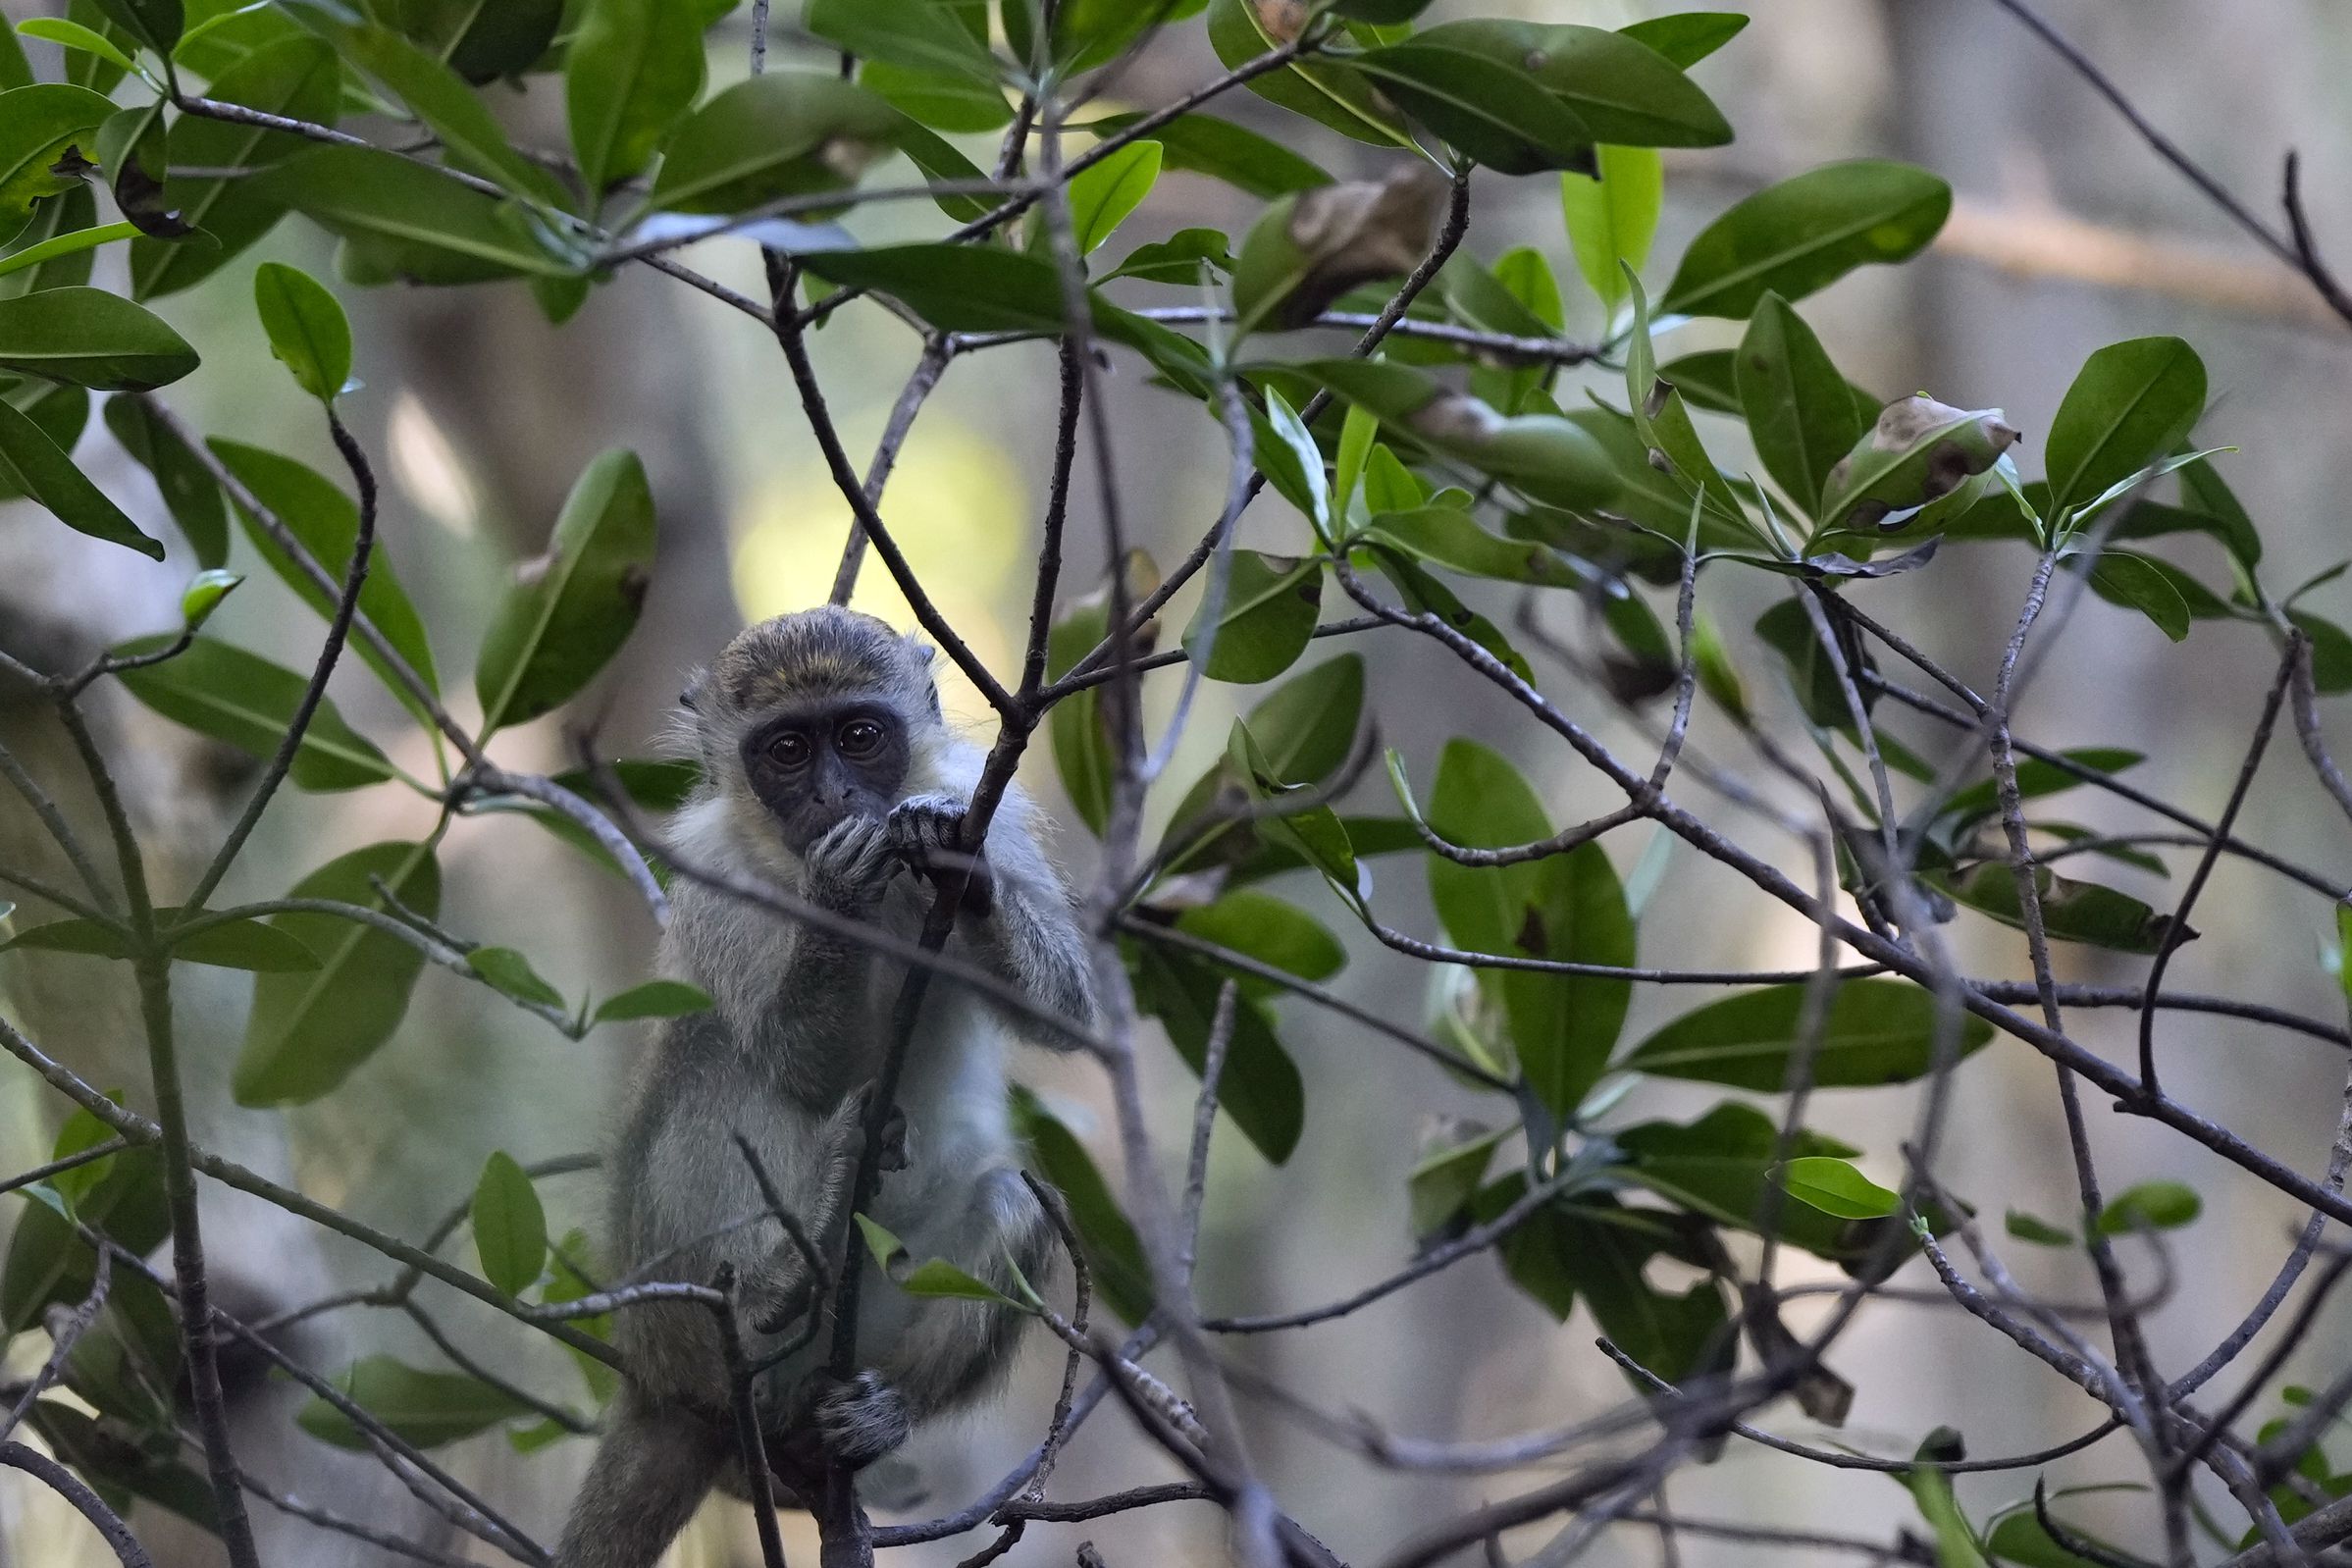 Colony of monkeys living in mangroves near Florida airport delight